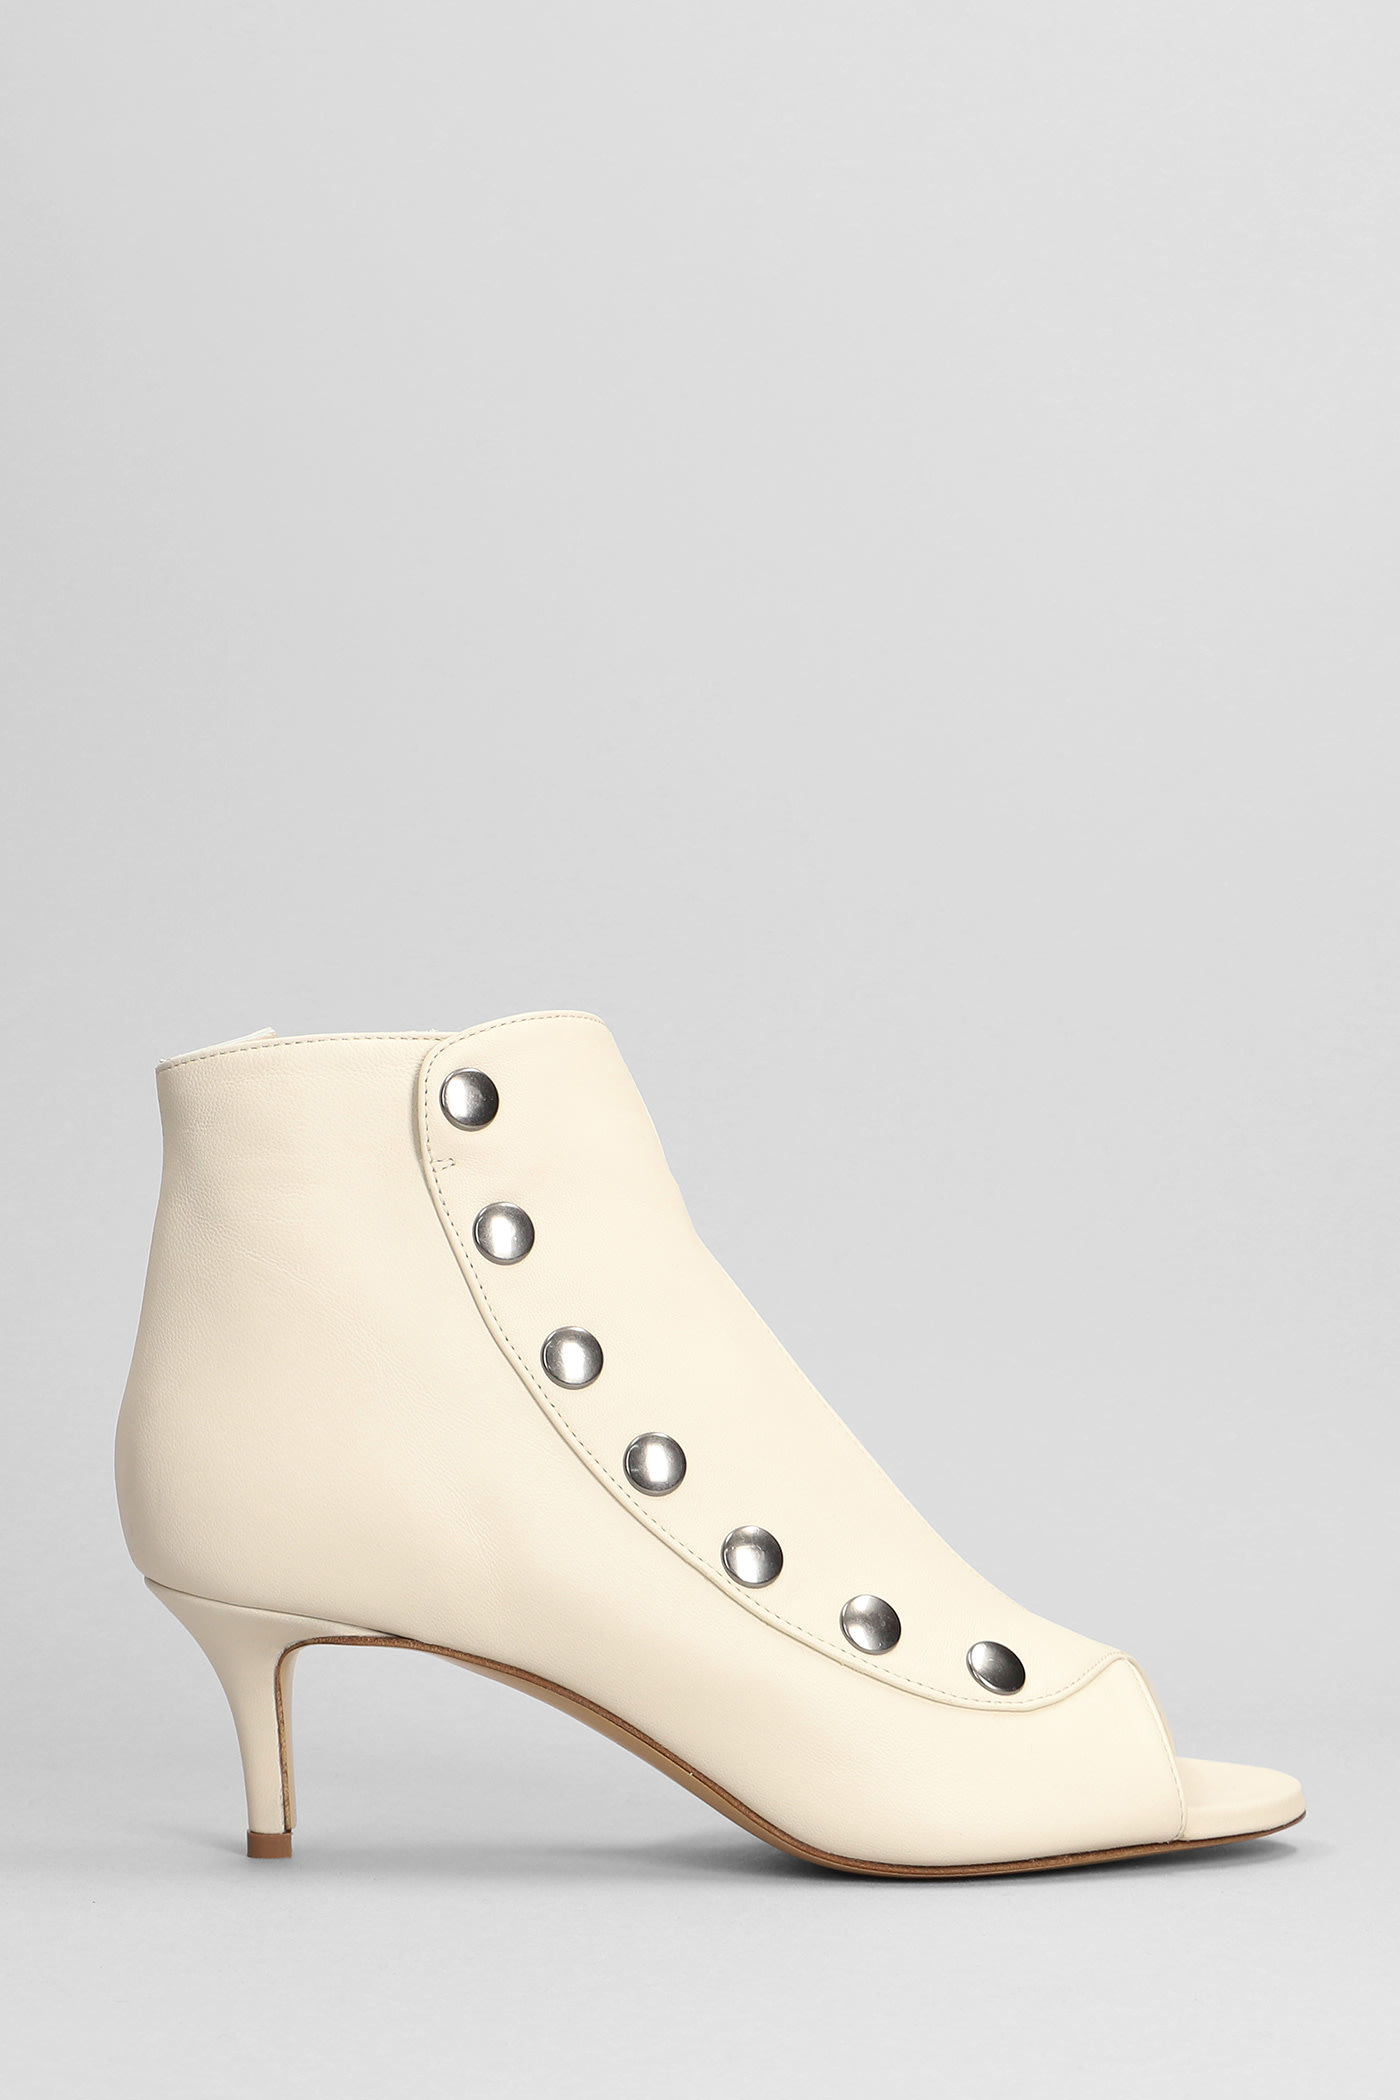 Marc Ellis Donzi High Heels Ankle Boots In Beige Leather